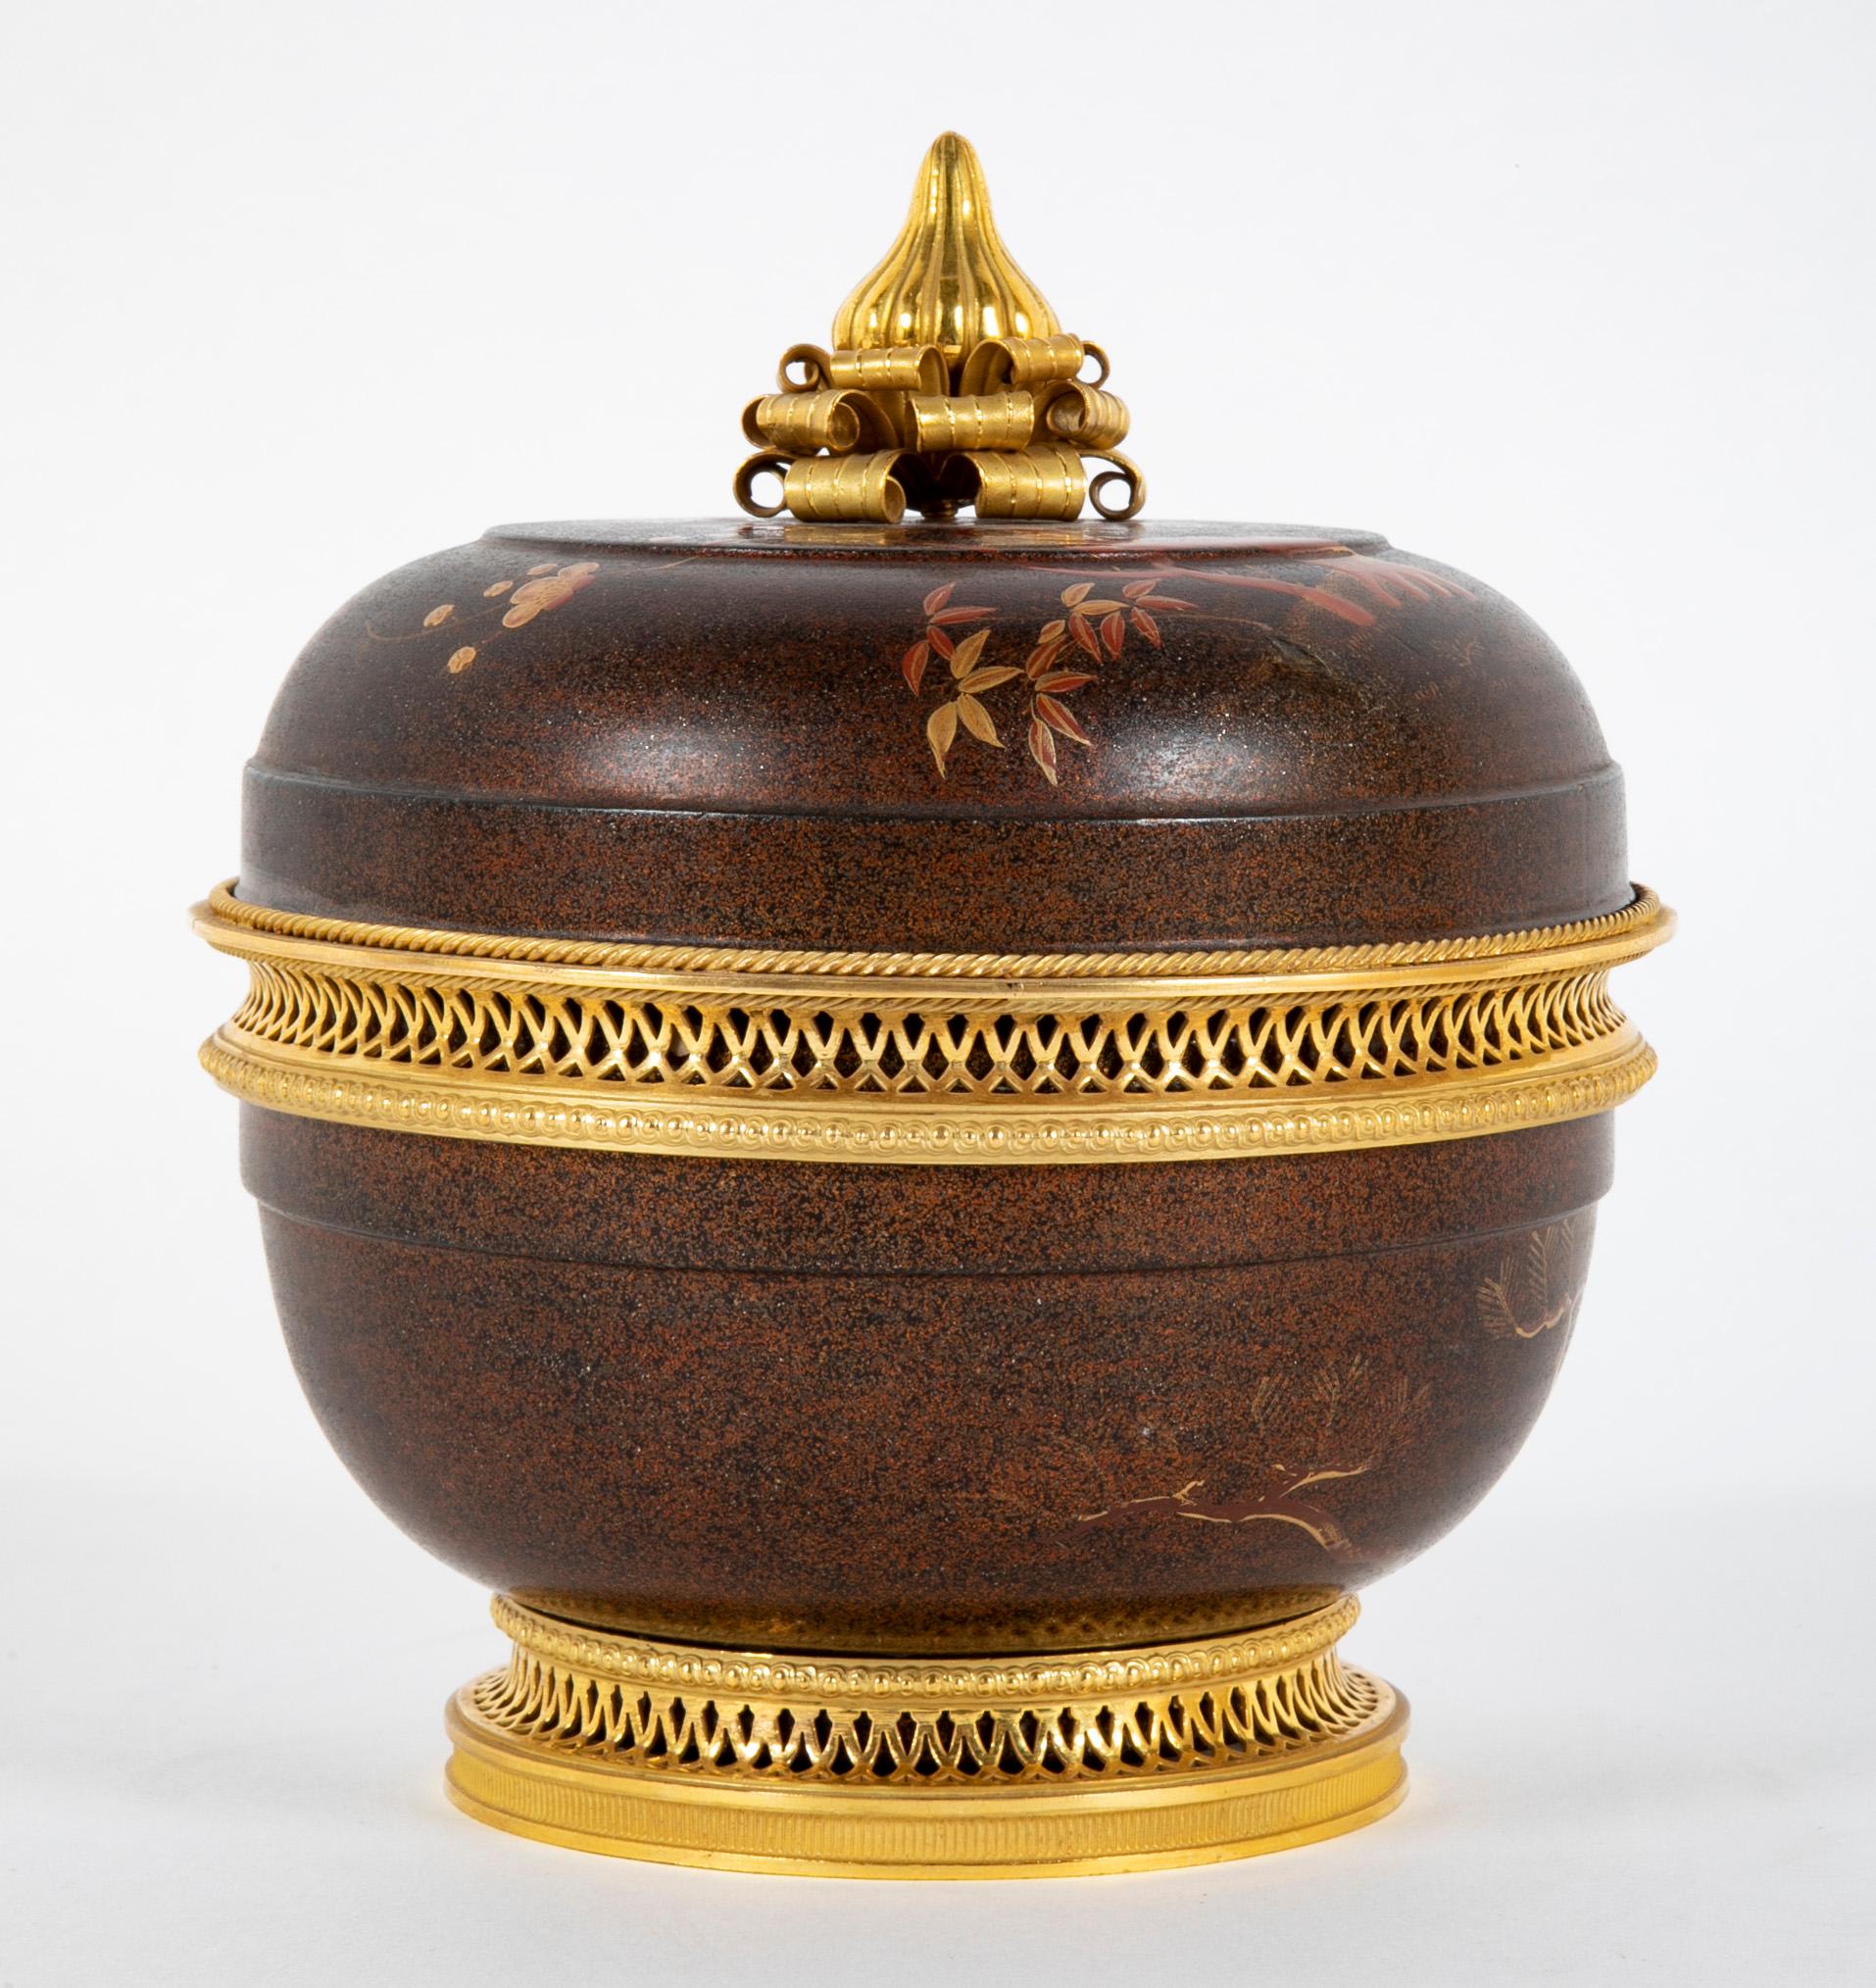 Lacquer Potpourri box and cover with ormolu mountings from 18th century Directoire Japan/ France.